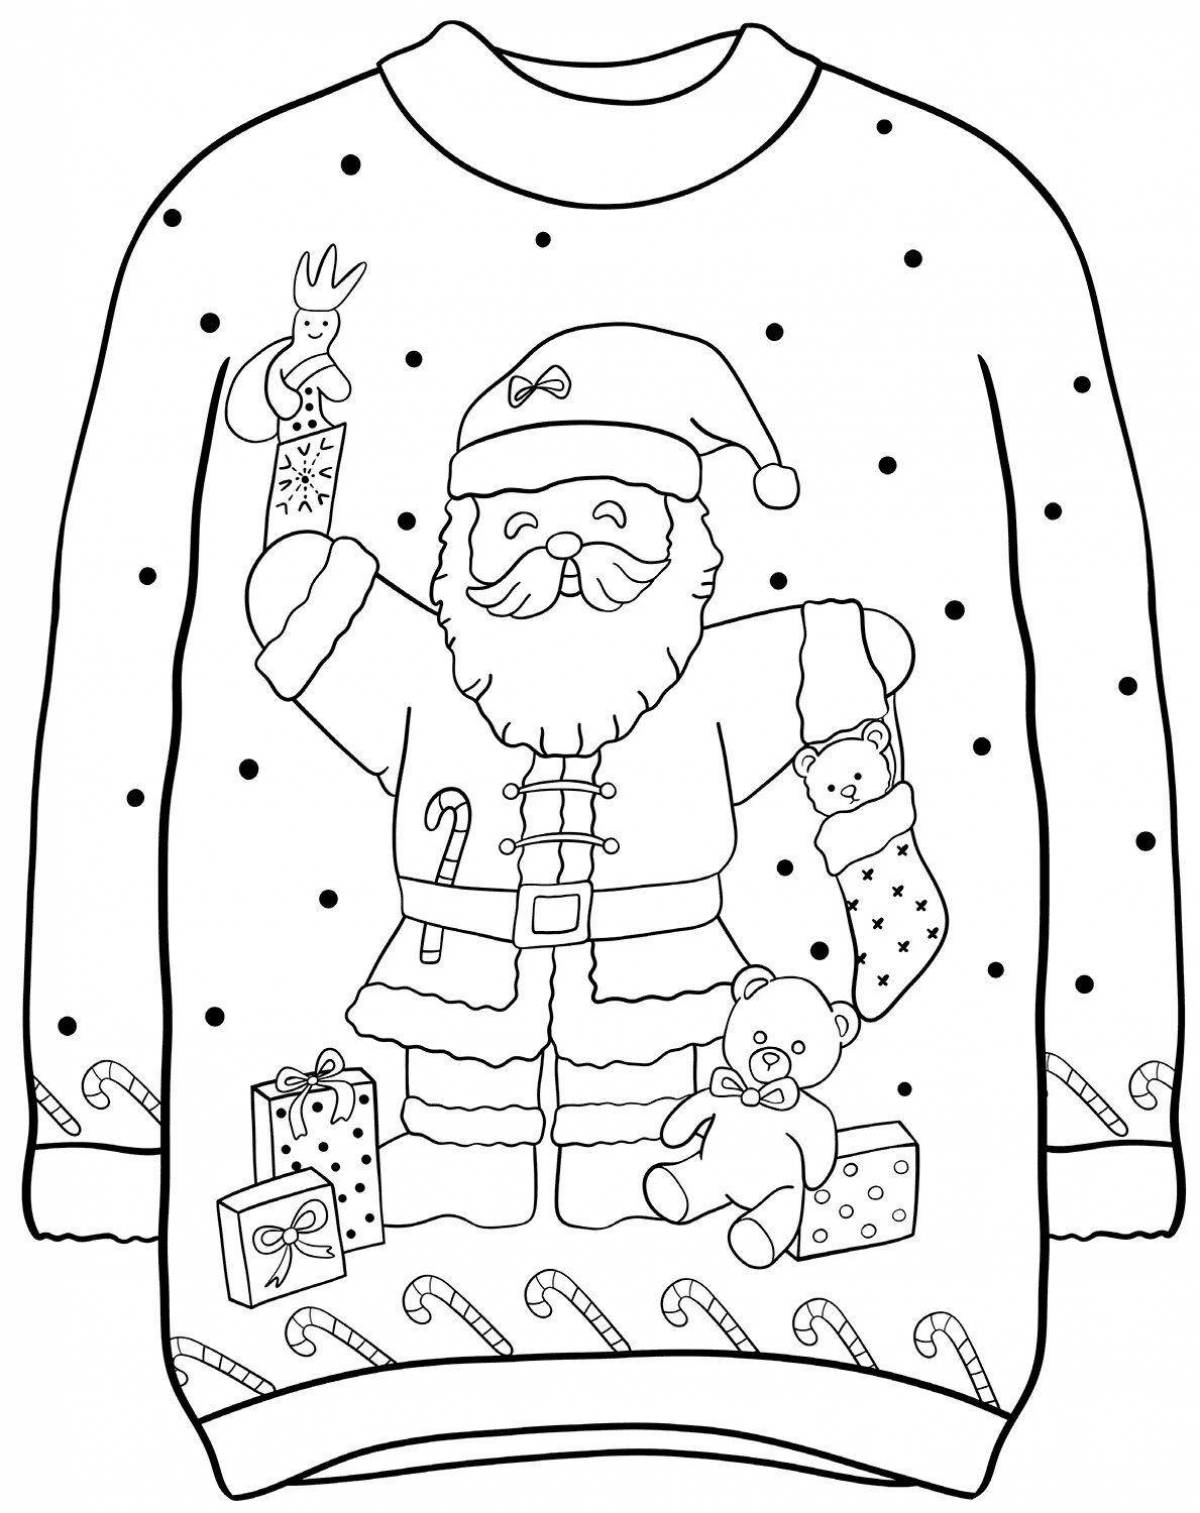 Playful jumper coloring page